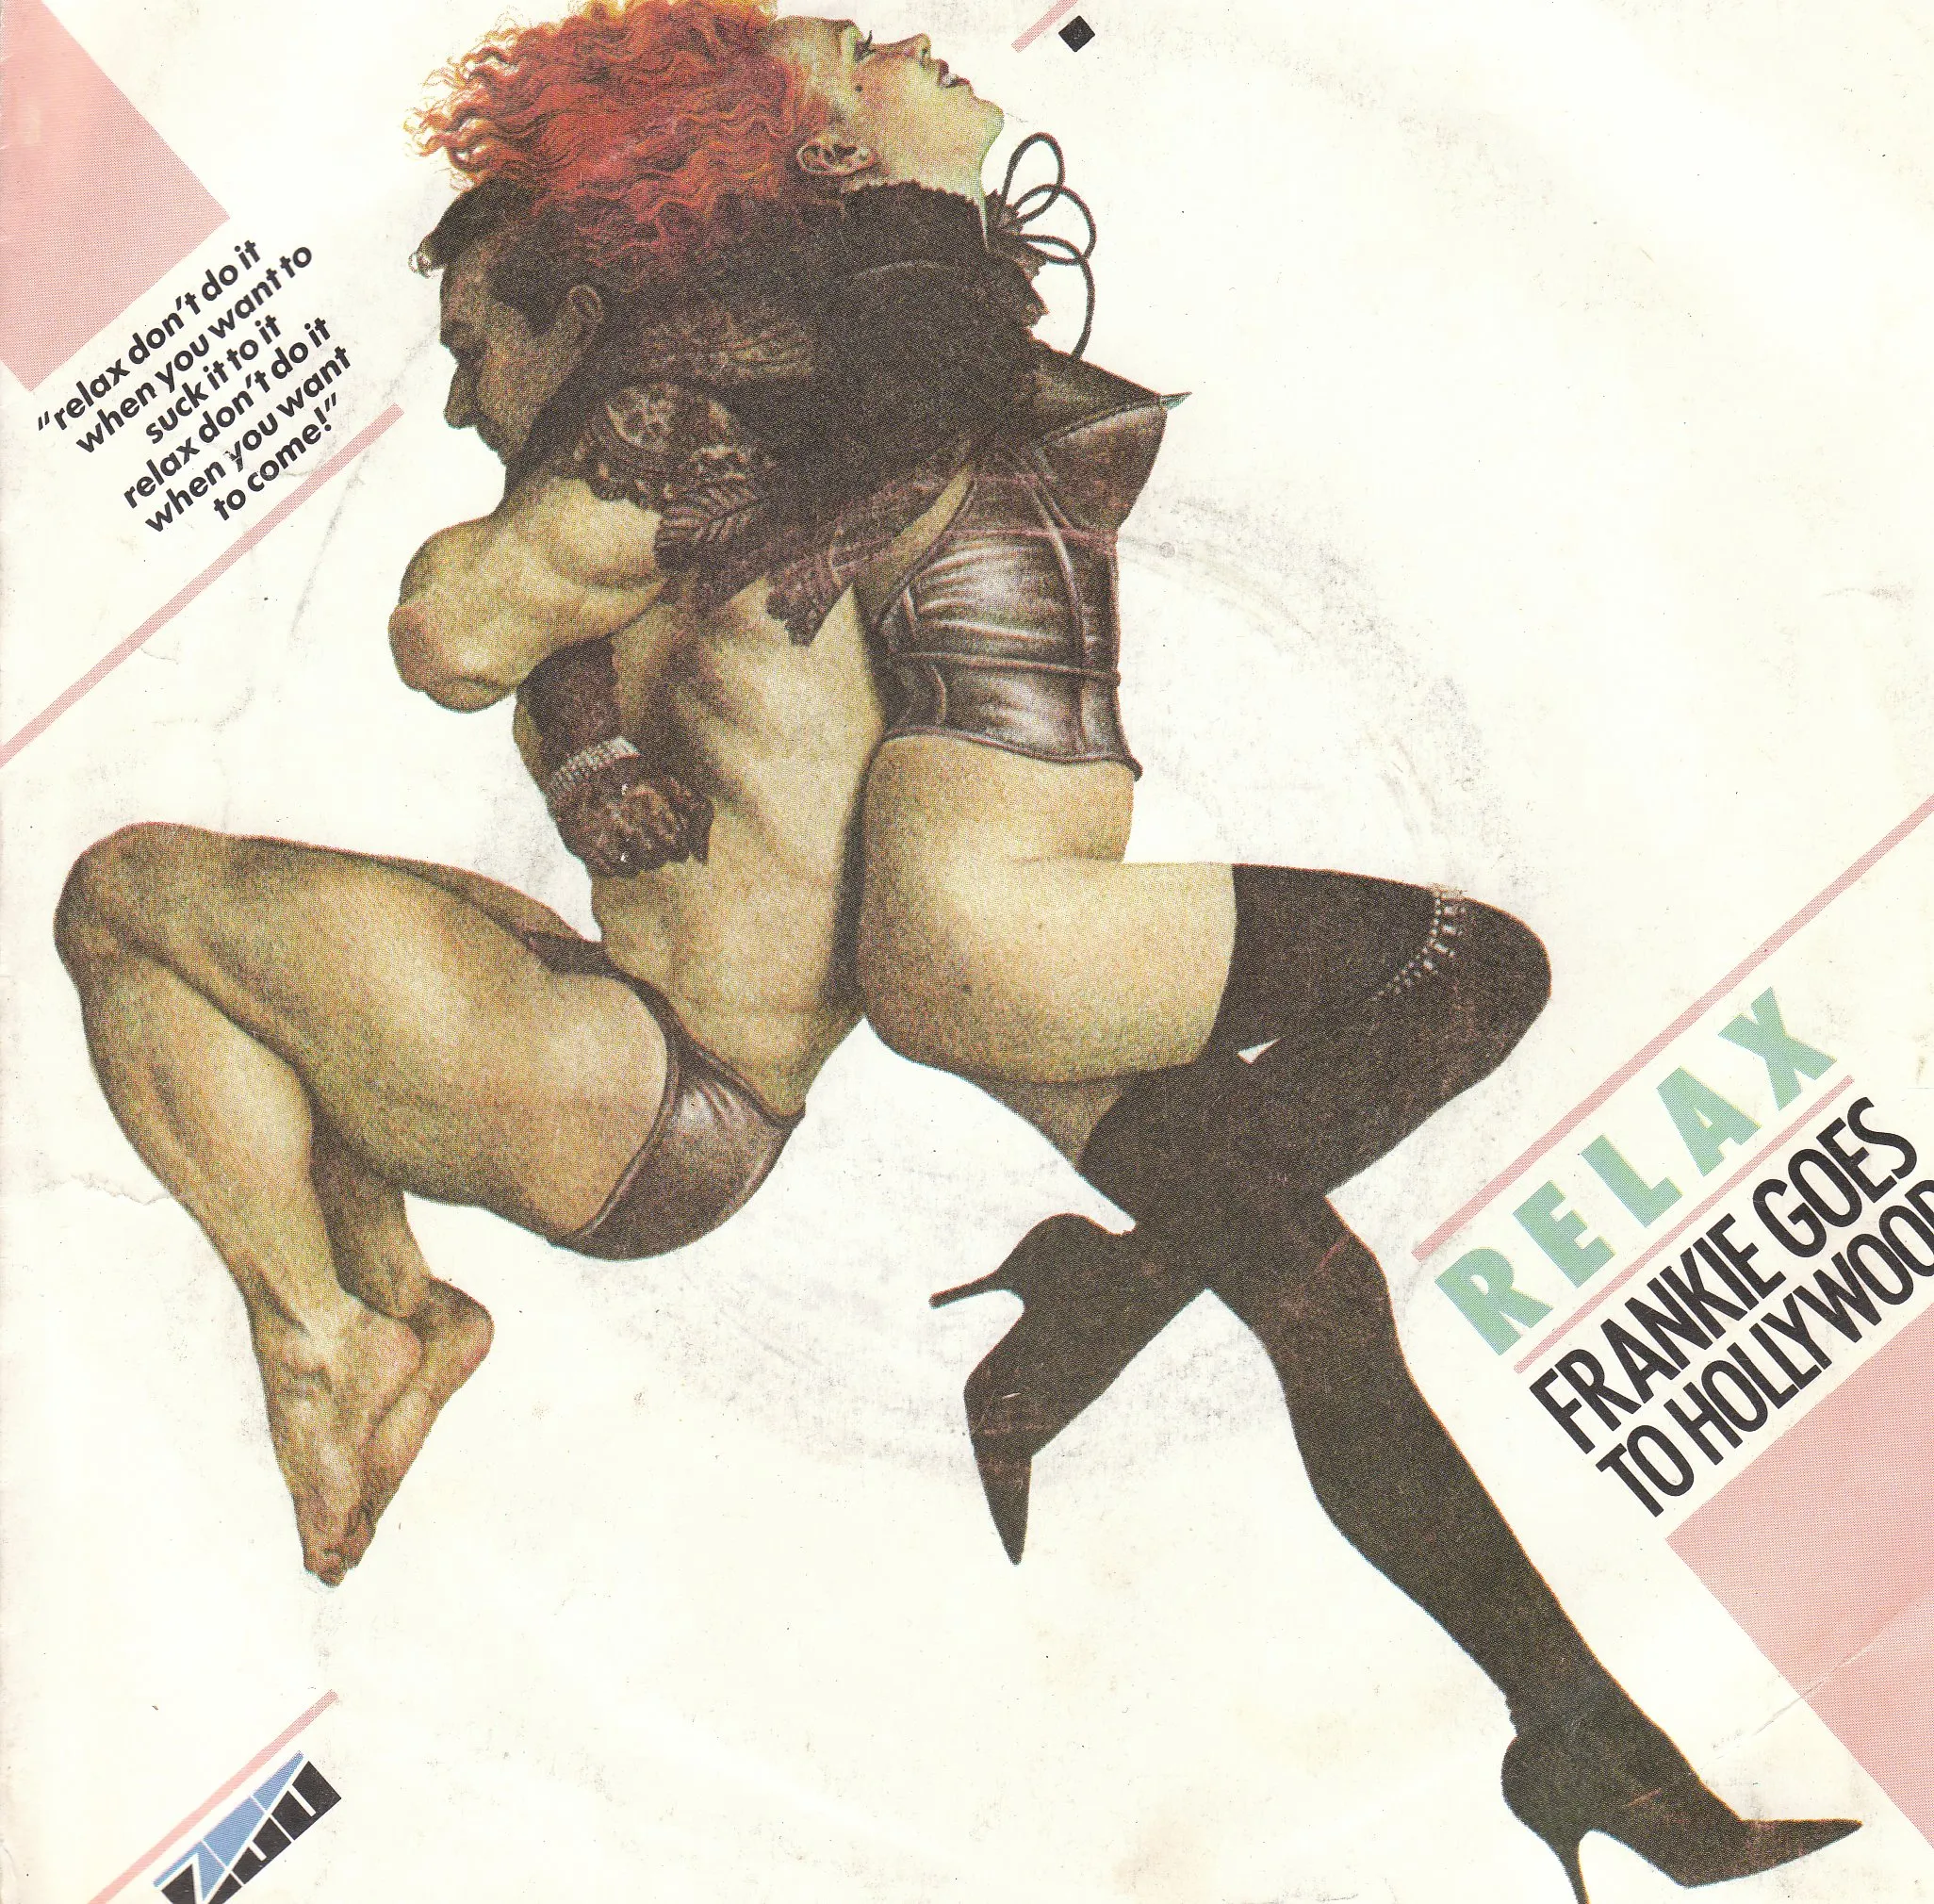 relax frankie goes to hollywood front cover